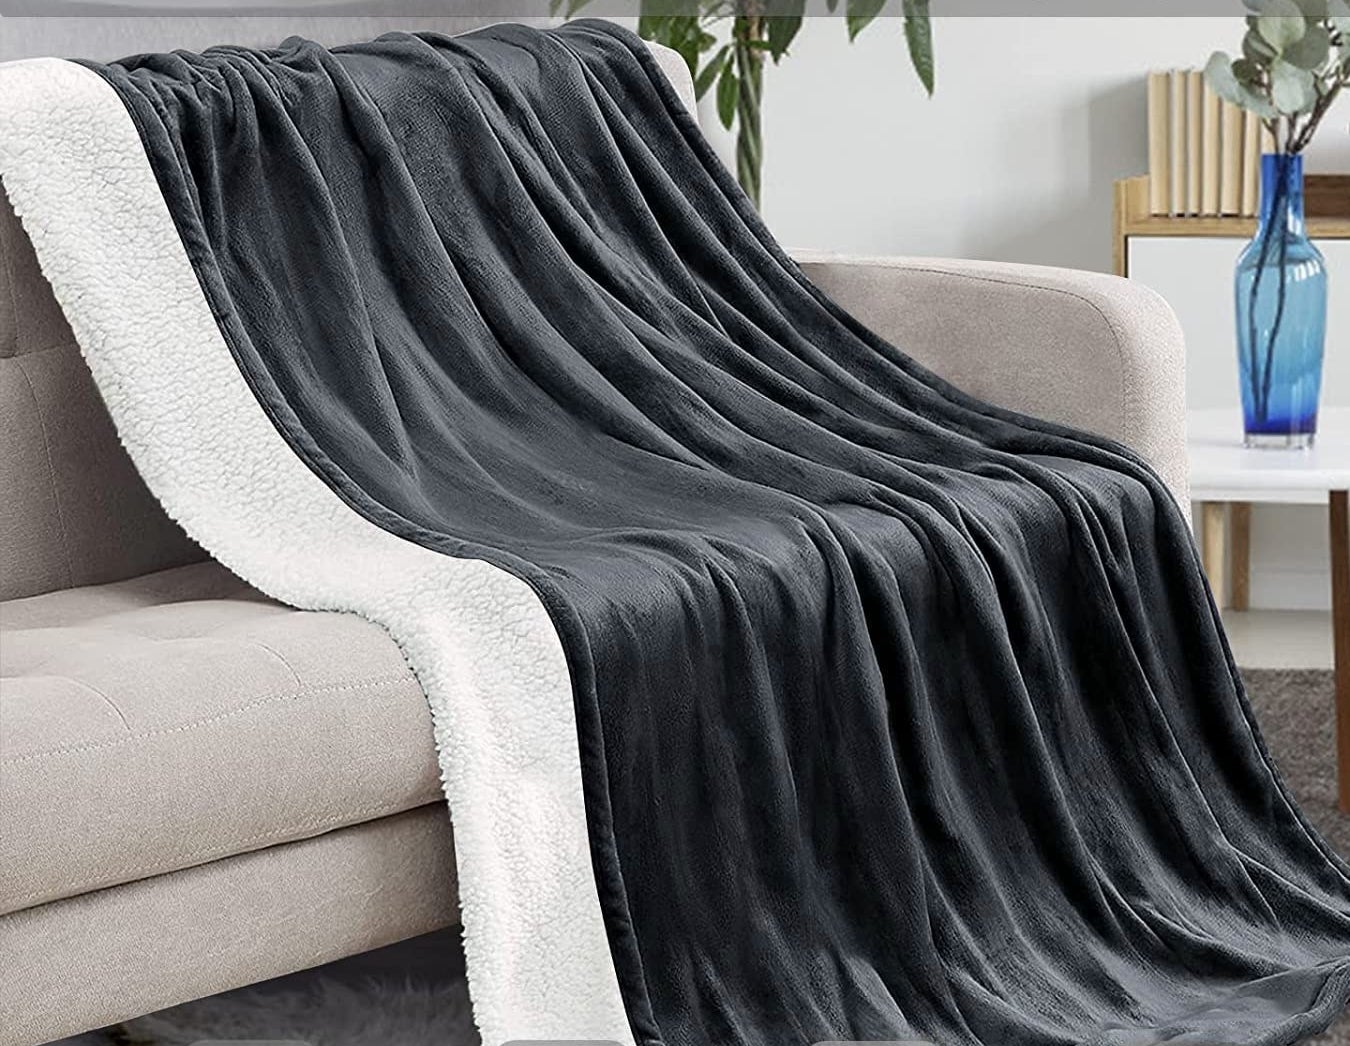 the throw blanket draped over a couch